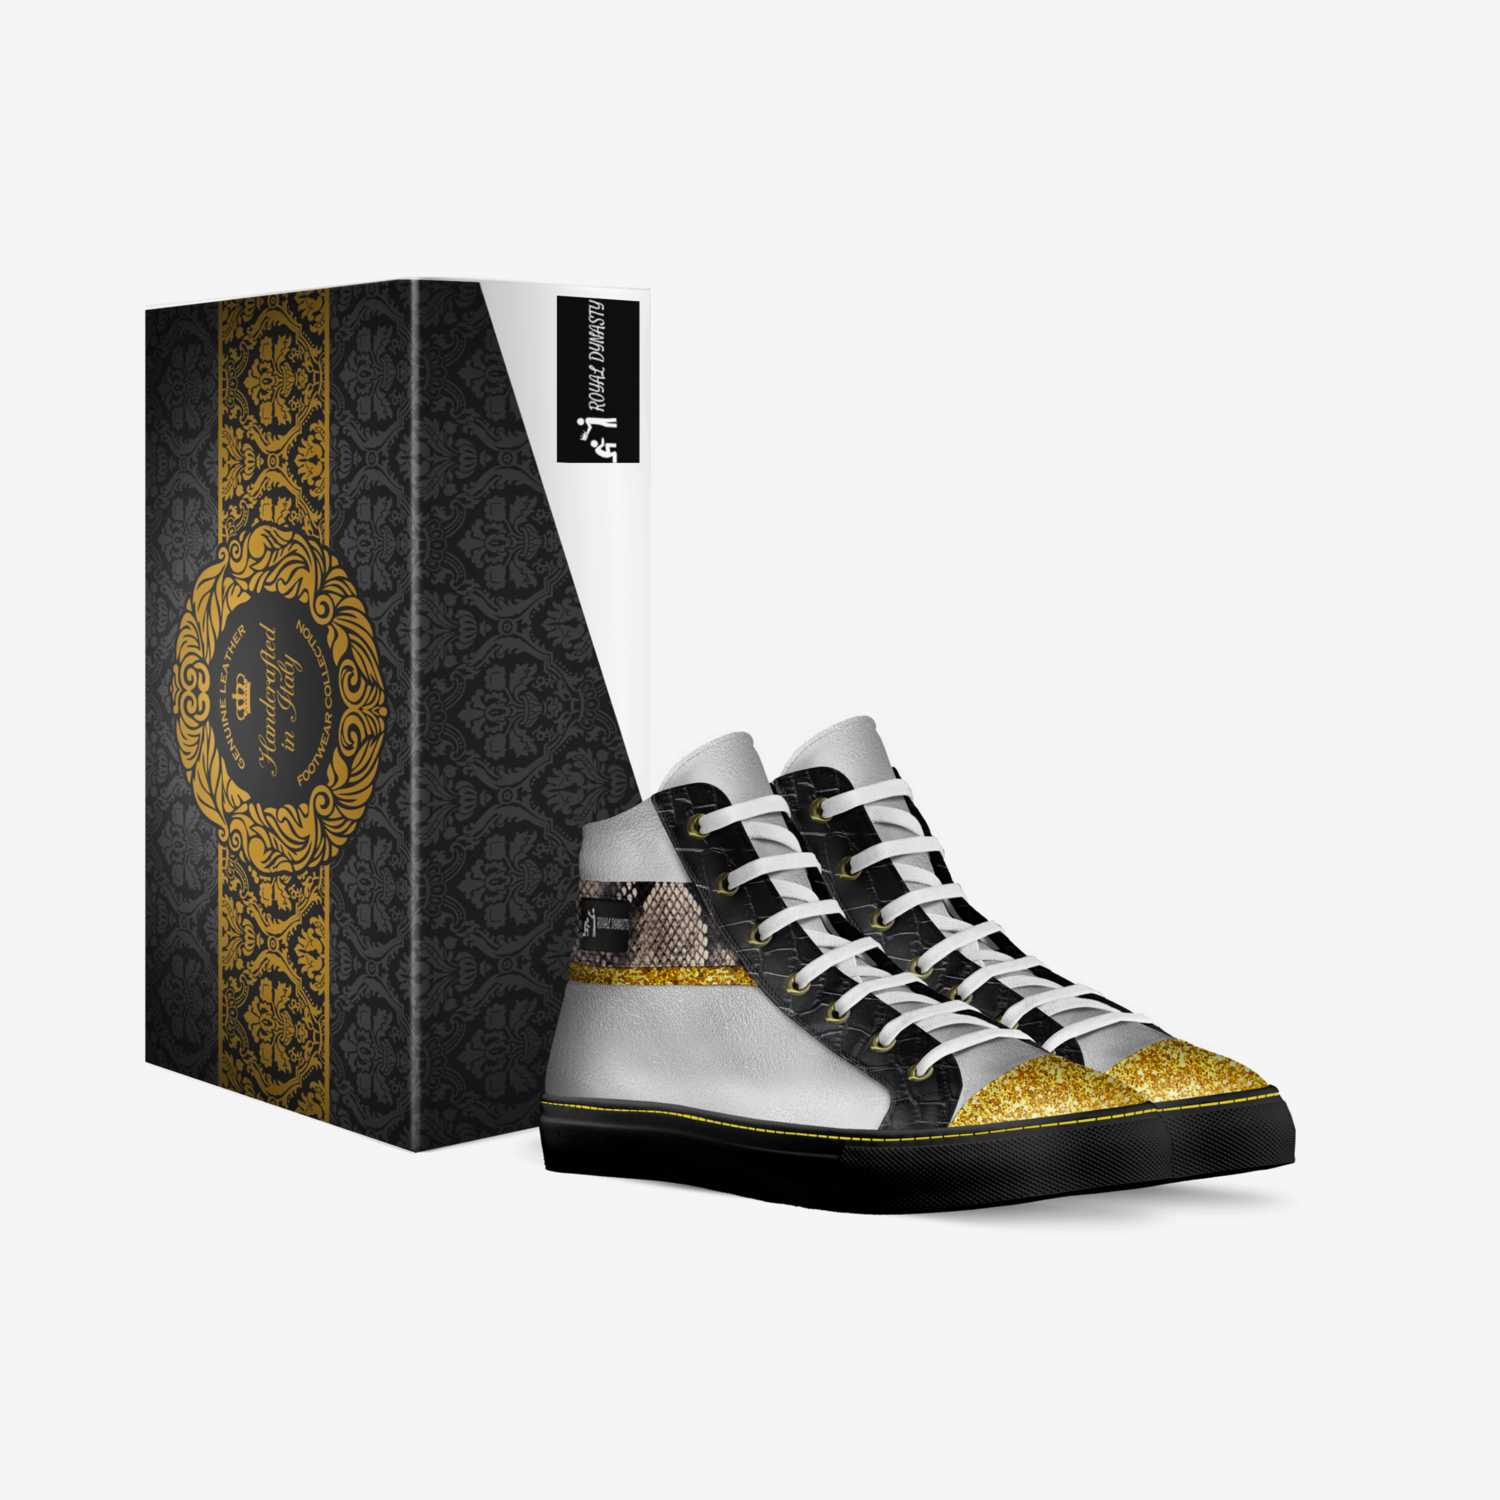 AJ ROYAL DYNASTY  custom made in Italy shoes by Jalal Randle | Box view